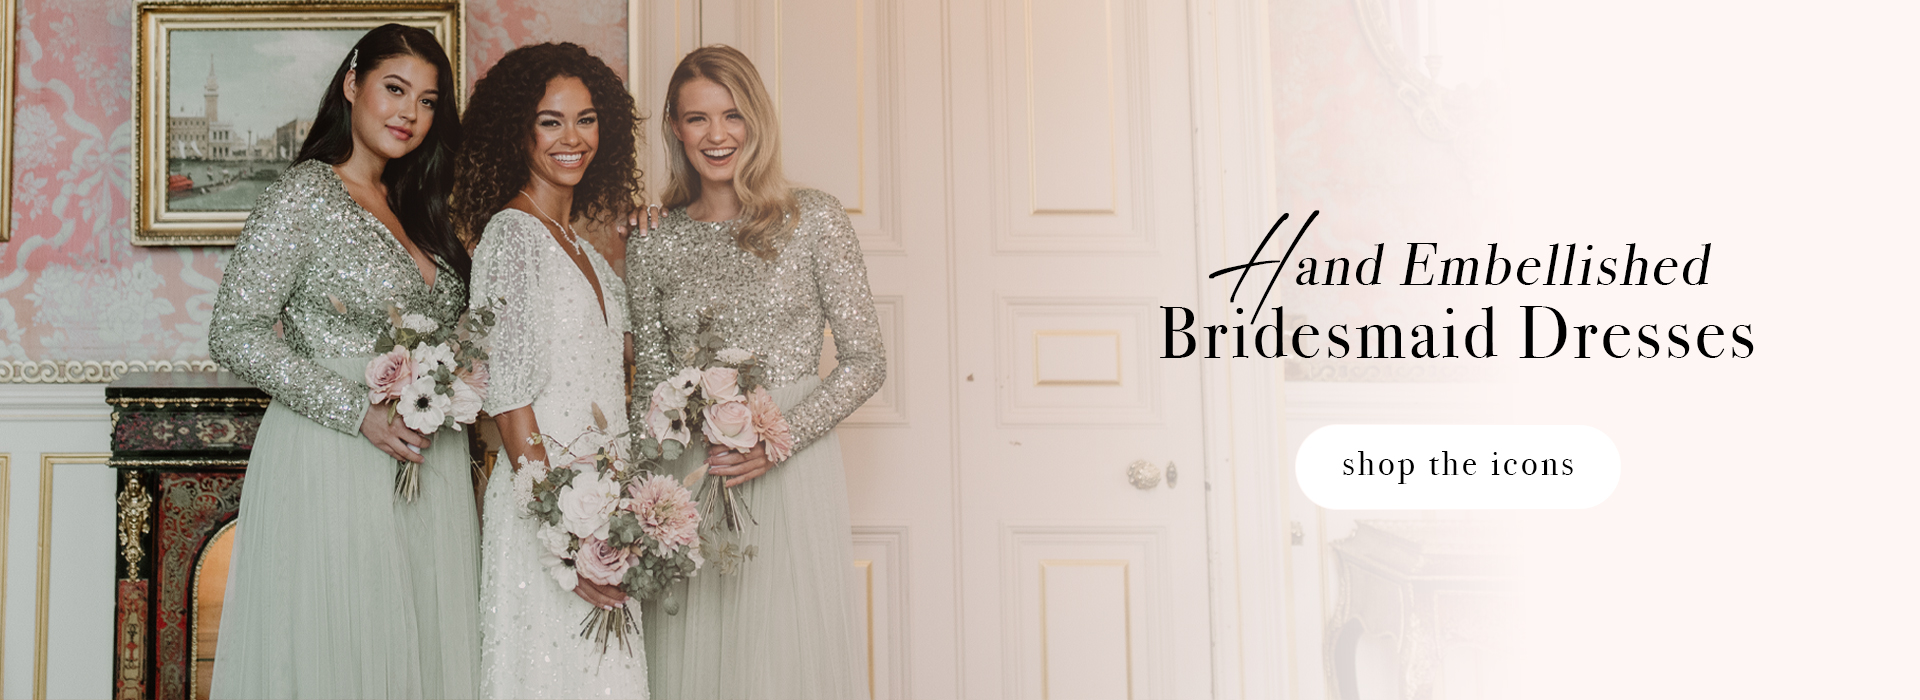 The Home Of Beautifully Whimsical Bridesmaid & Formal Dresses | Maya Deluxe